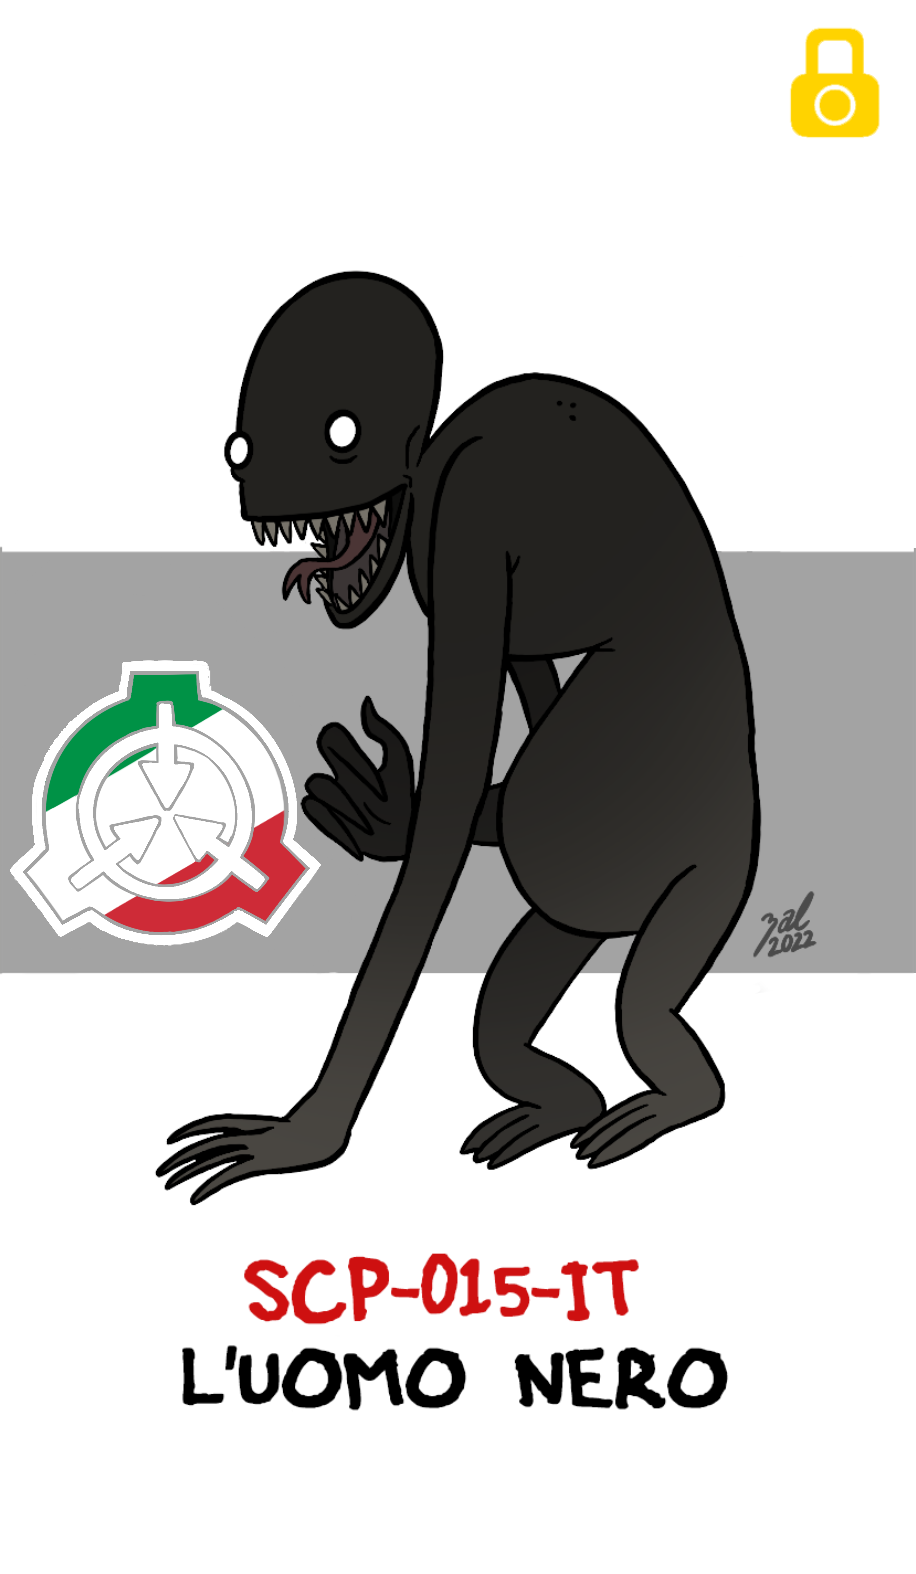 SCP-5031 by Zal-Cryptid on DeviantArt